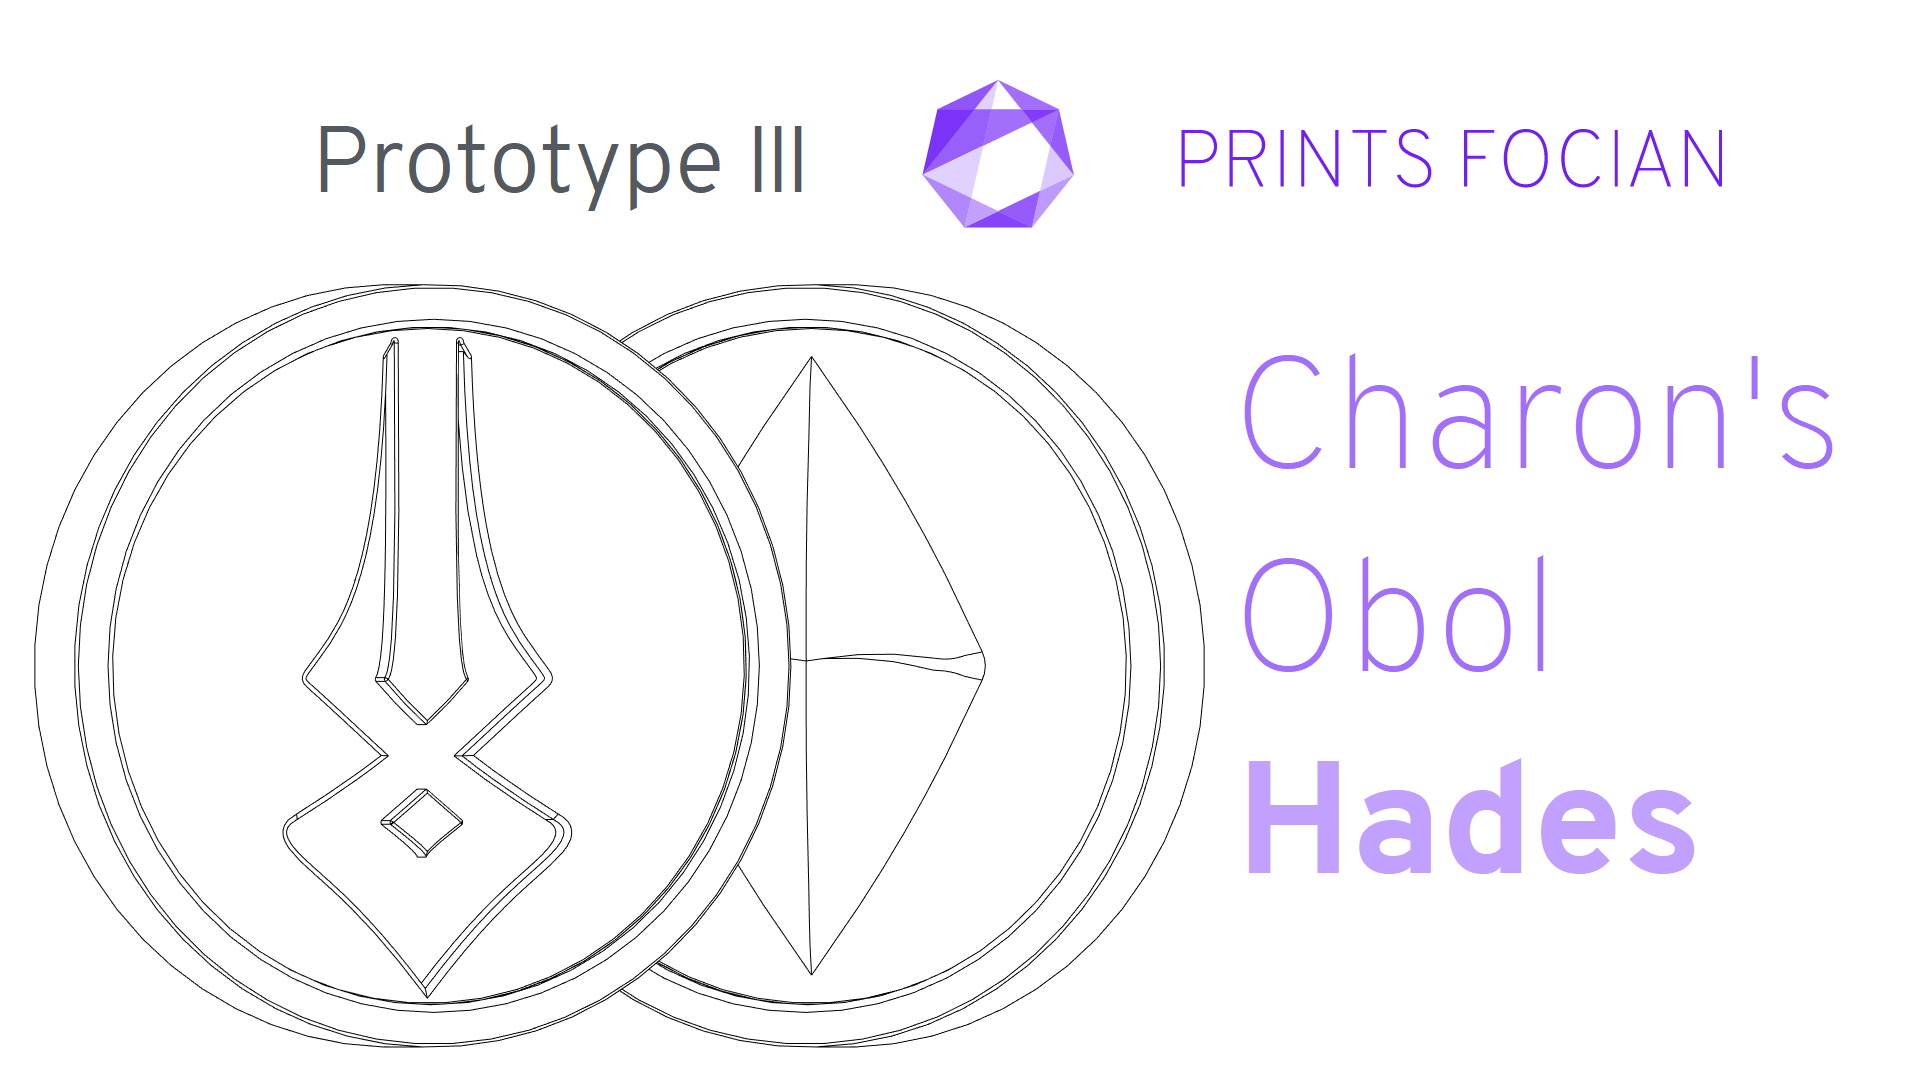 Wireframe image of Charon's Obol on a white background. Prints Focian Icon top and central. Text: Purple Prints Focian, Charon's Obol, and Hades. Dark grey text Prototype III